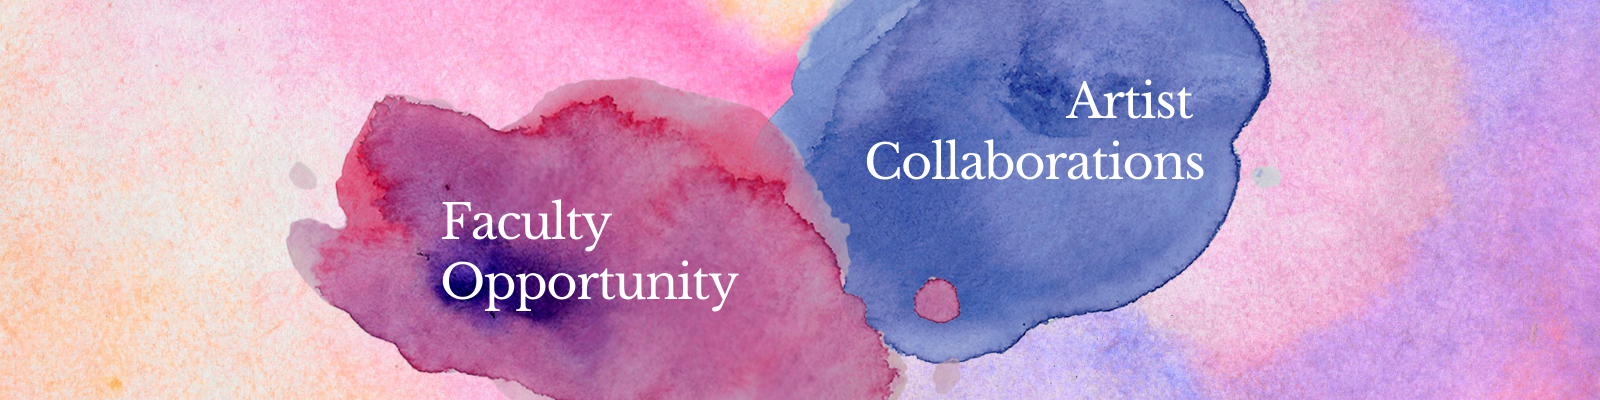 Faculty Artist Collaboration Opportunity on a watercolor background of purples and oranges